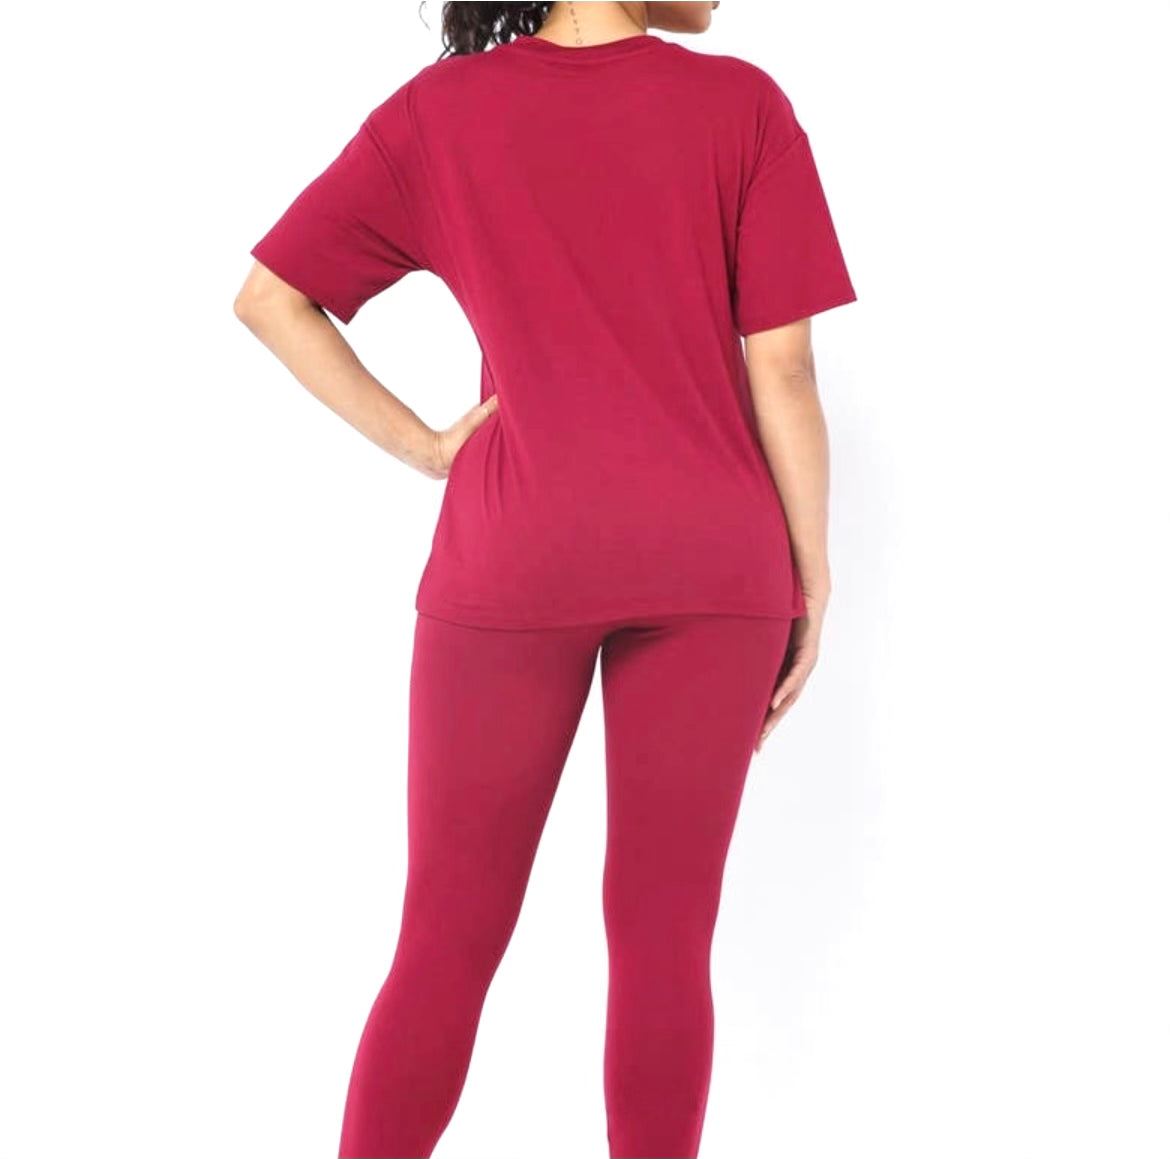 Plus Size Legging Sets| Plus Size Two Piece Outfits Regular Tee and Leggings Matching Set